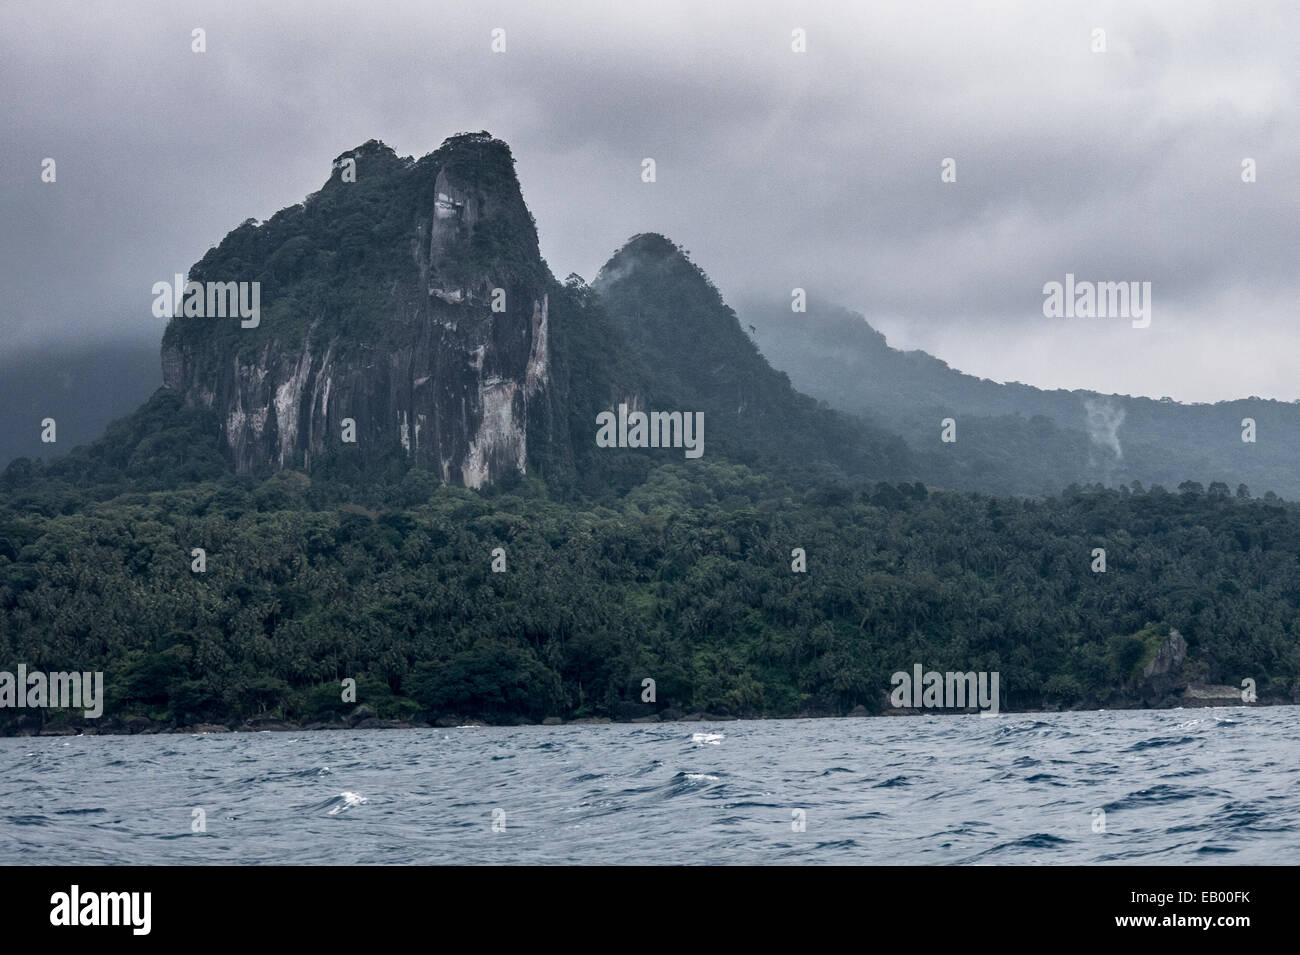 The inaccessible southern rainforest of the island of Príncipe (São Tomé and Príncipe, Gulf of Guinea) seen from the sea Stock Photo